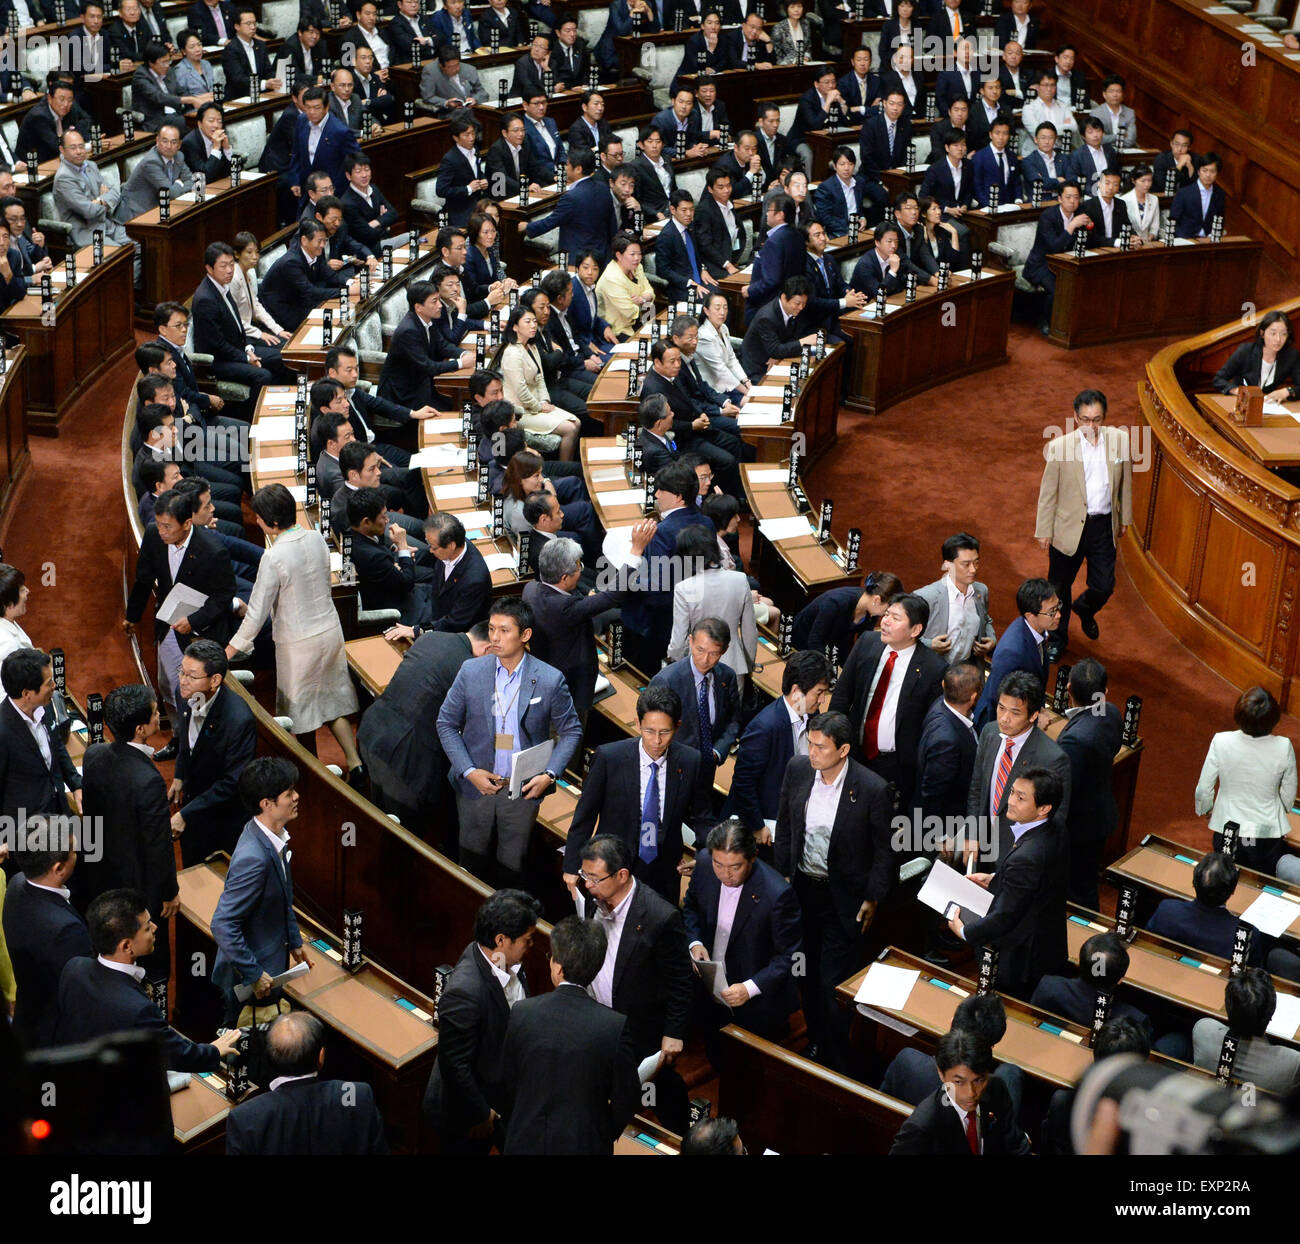 Tokyo, Japan. 16th July, 2015. Japanese opposition lawmakers leave the lower house to oppose the security bills in Tokyo, Japan, on July 16, 2015. Japan's ruling coalition led by Prime Minister Shinzo Abe on Thursday rammed through a series of controversial security bills in the all-powerful lower house of the nation's Diet amid strong public opposition, marking the most significant overturn of the nation's 'purely defensive' defense posture. Credit:  Ma Ping/Xinhua/Alamy Live News Stock Photo